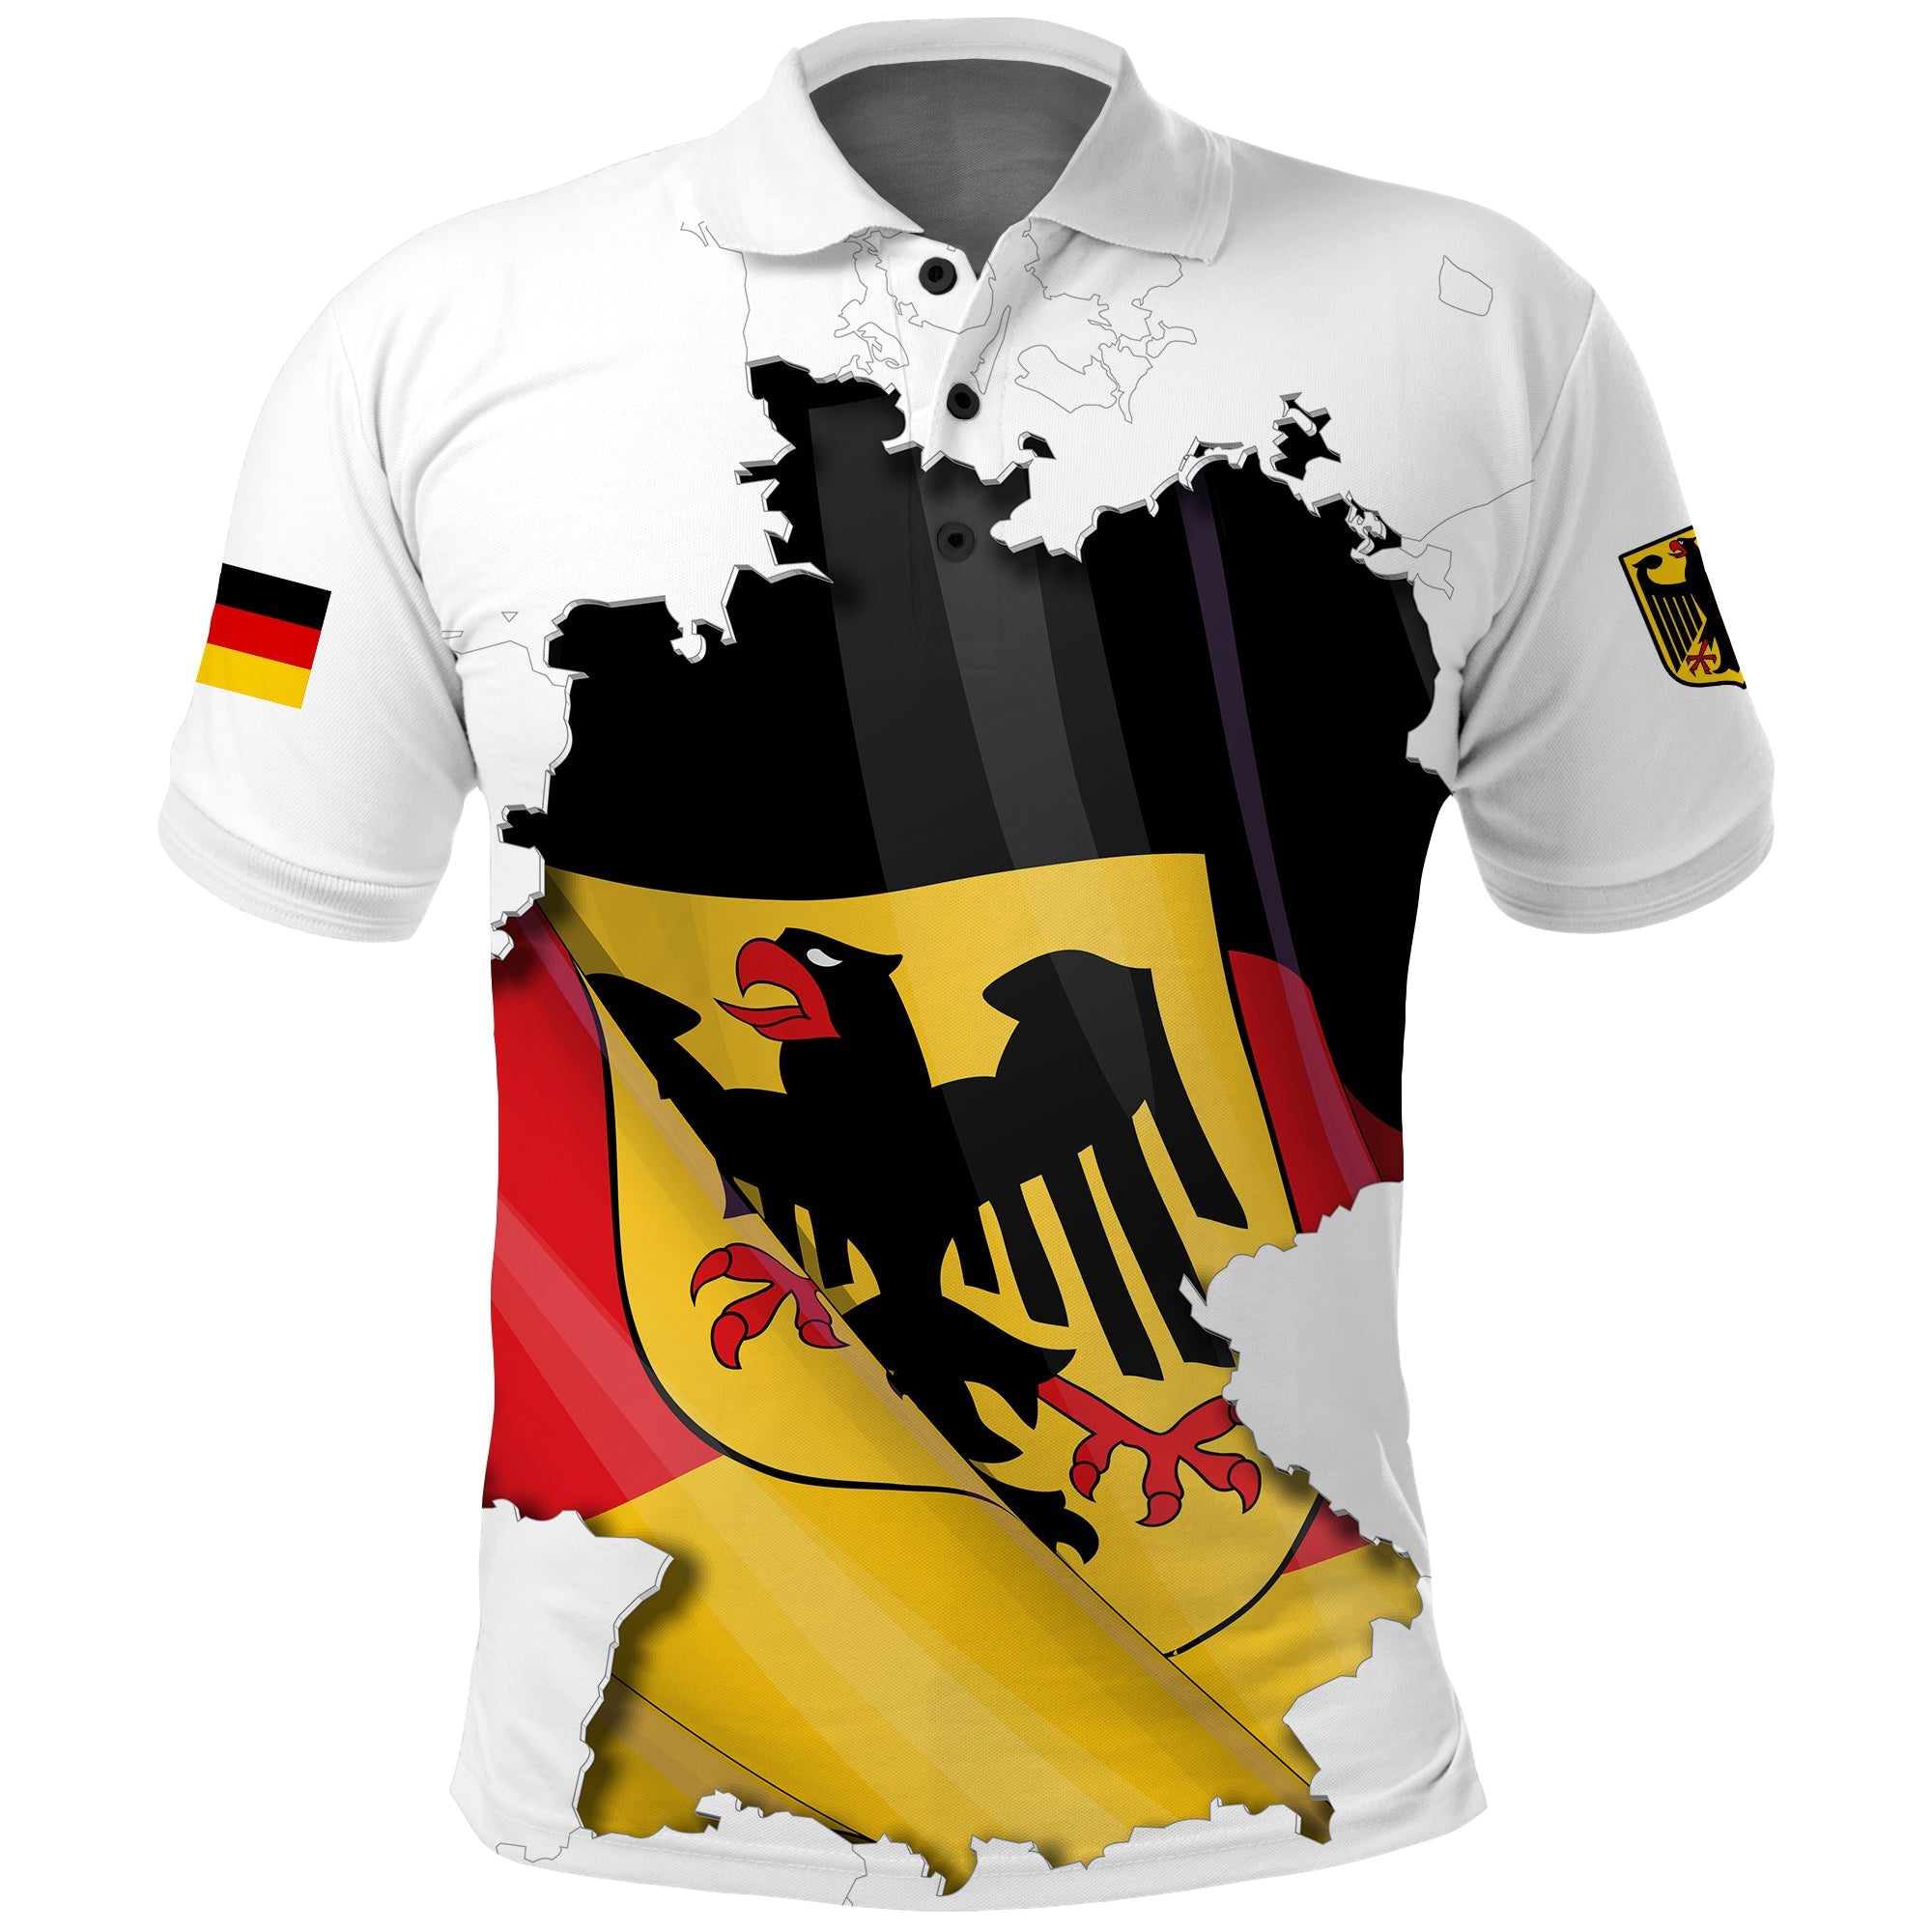 germany-polo-shirt-grunge-deutschland-map-and-coat-of-arms